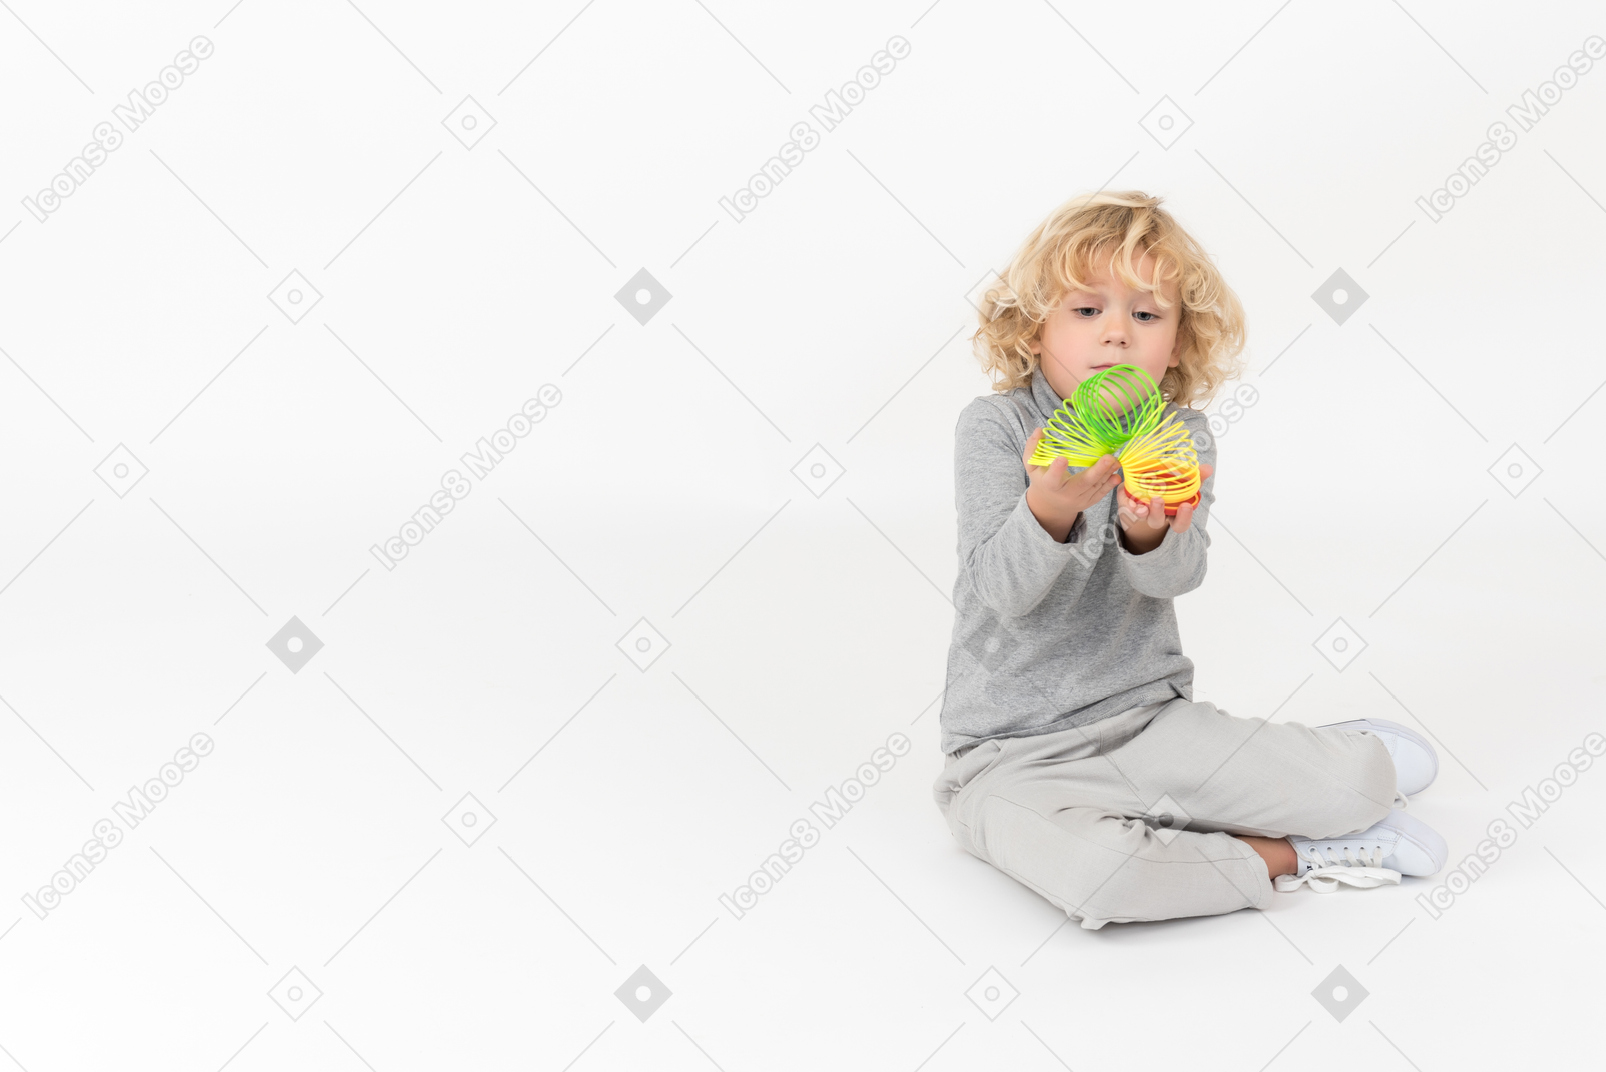 Kid boy sitting on the floor and playing